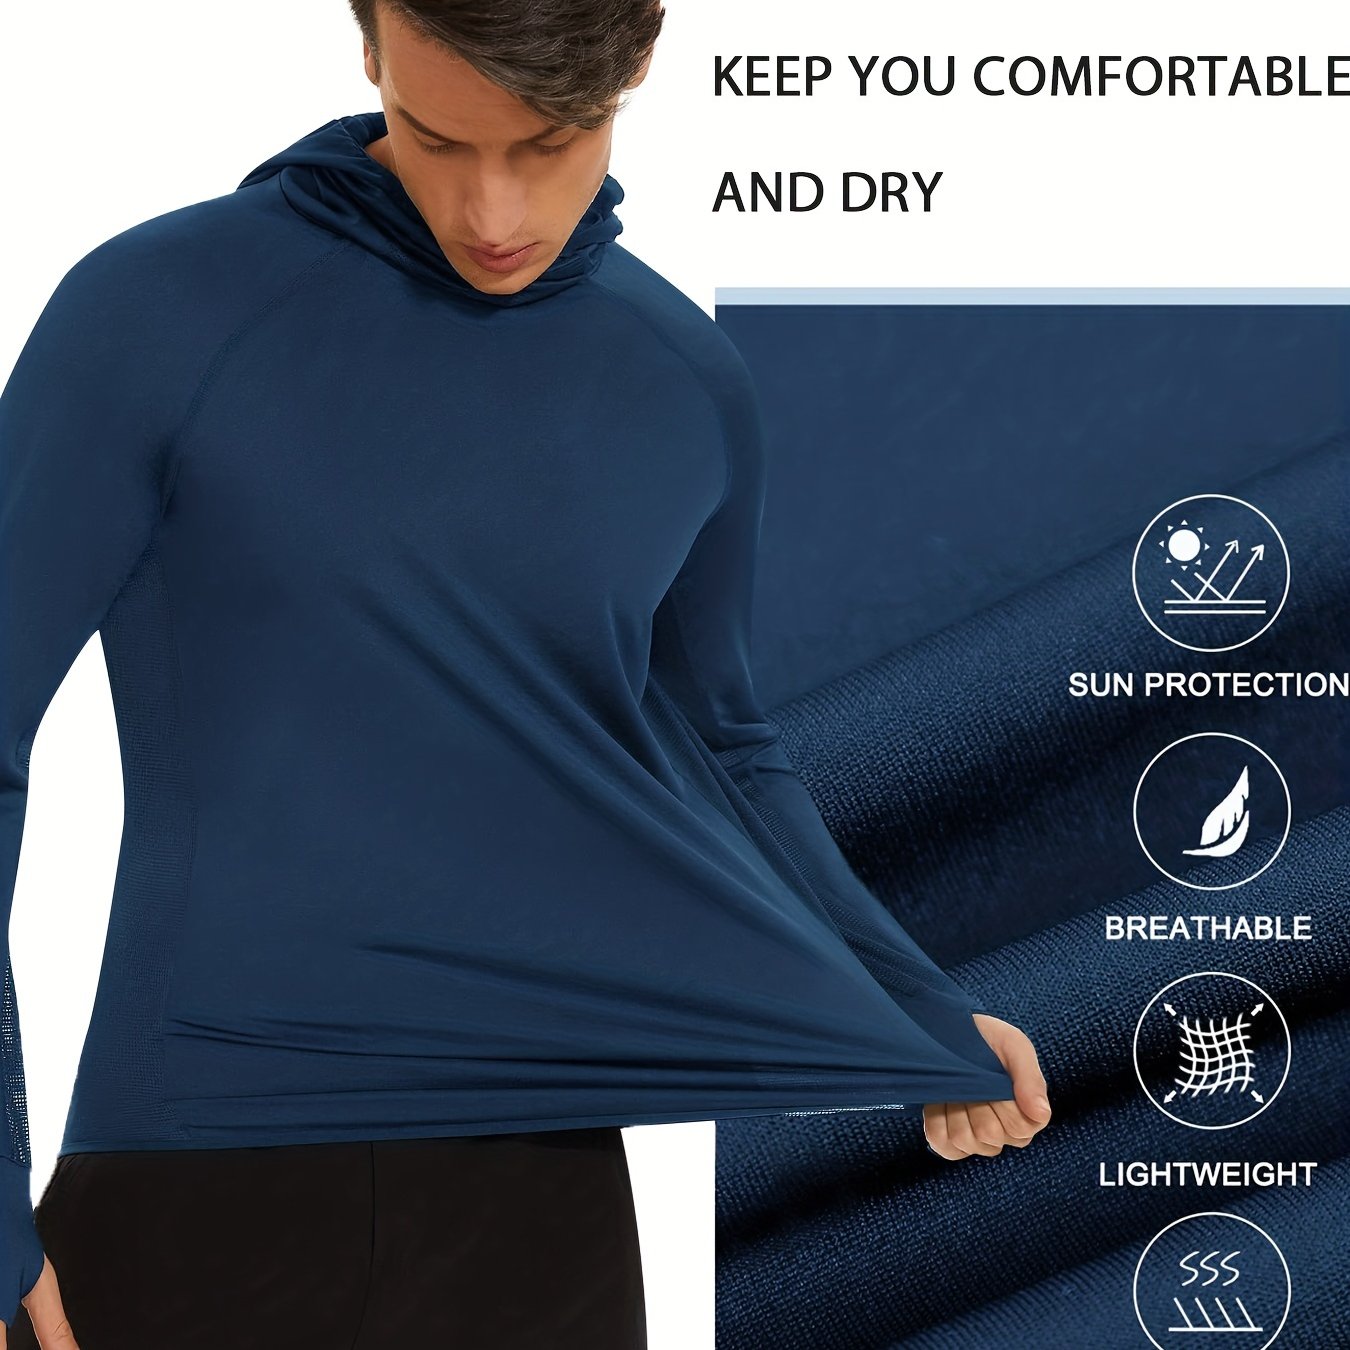 Men's Long Sleeved Hooded Sport Shirt Sunscreen Breathable Quick Drying ...